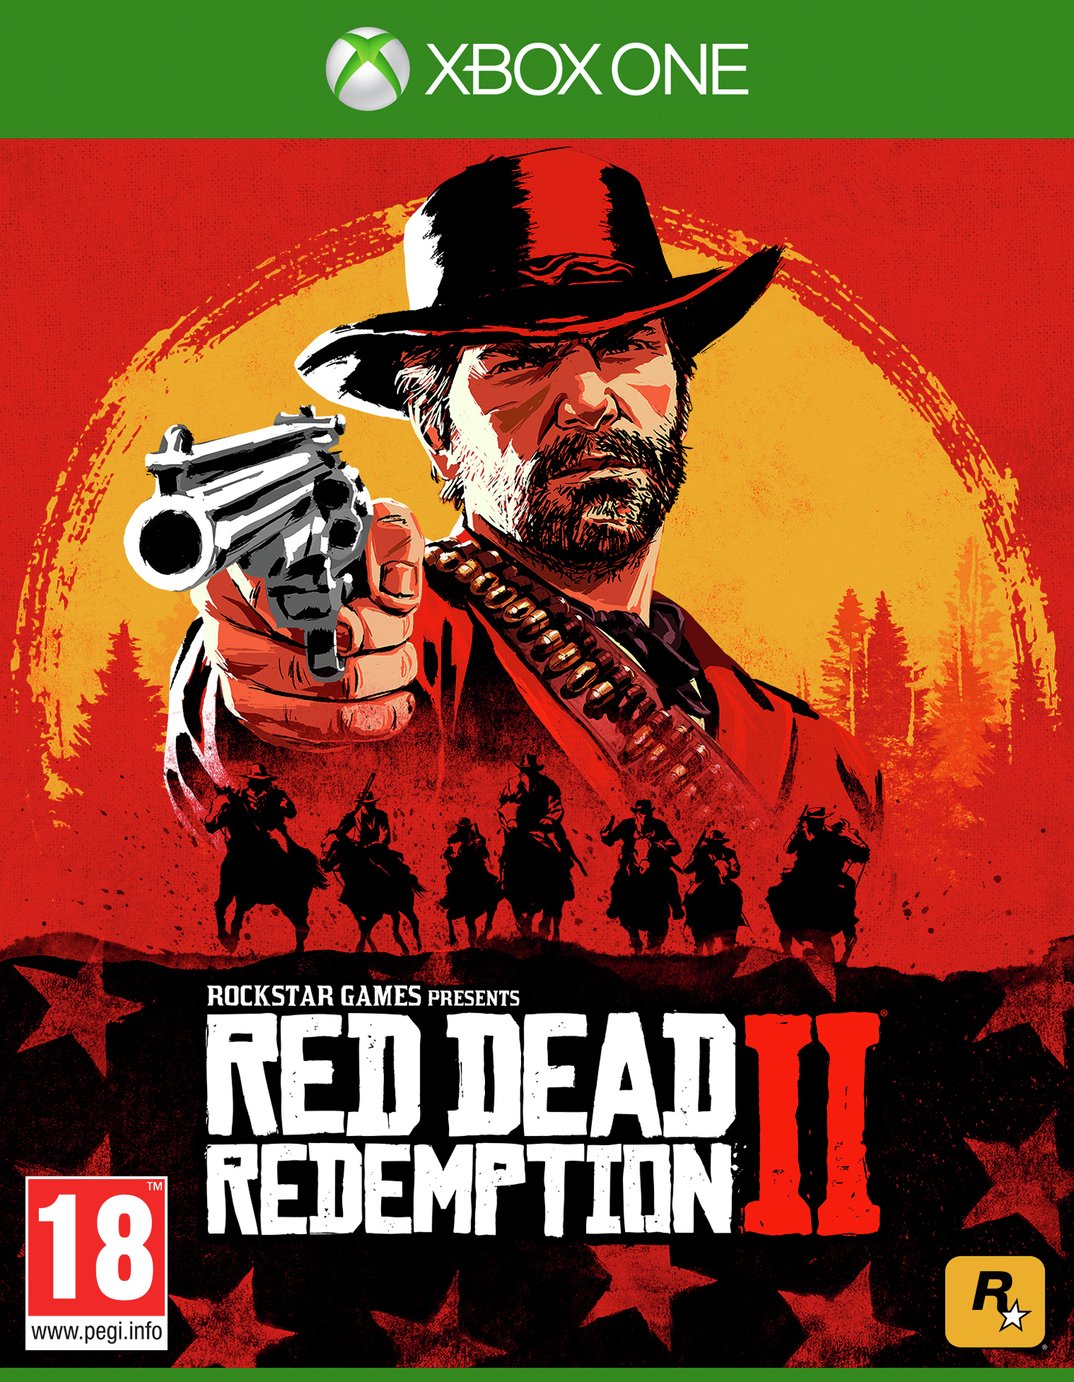 red dead redemption 2 xbox one